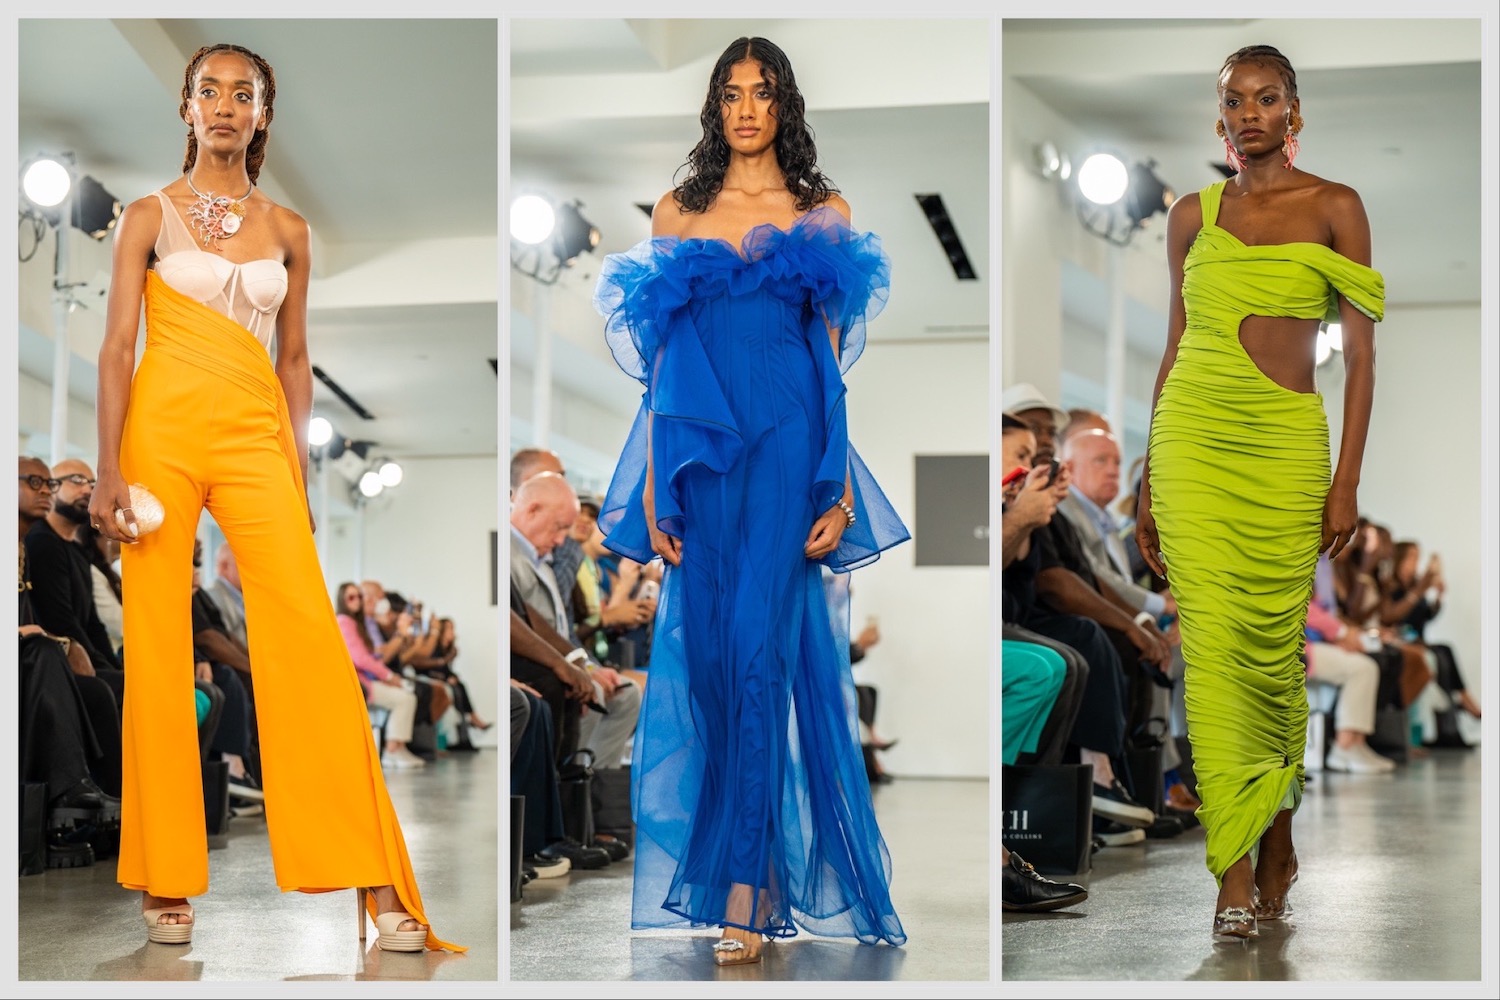 From left to right: a model walking down the runway in a white corset top and orange pants; a model walking down the runway in a blue dress; a model walking down the runway in a green dress.